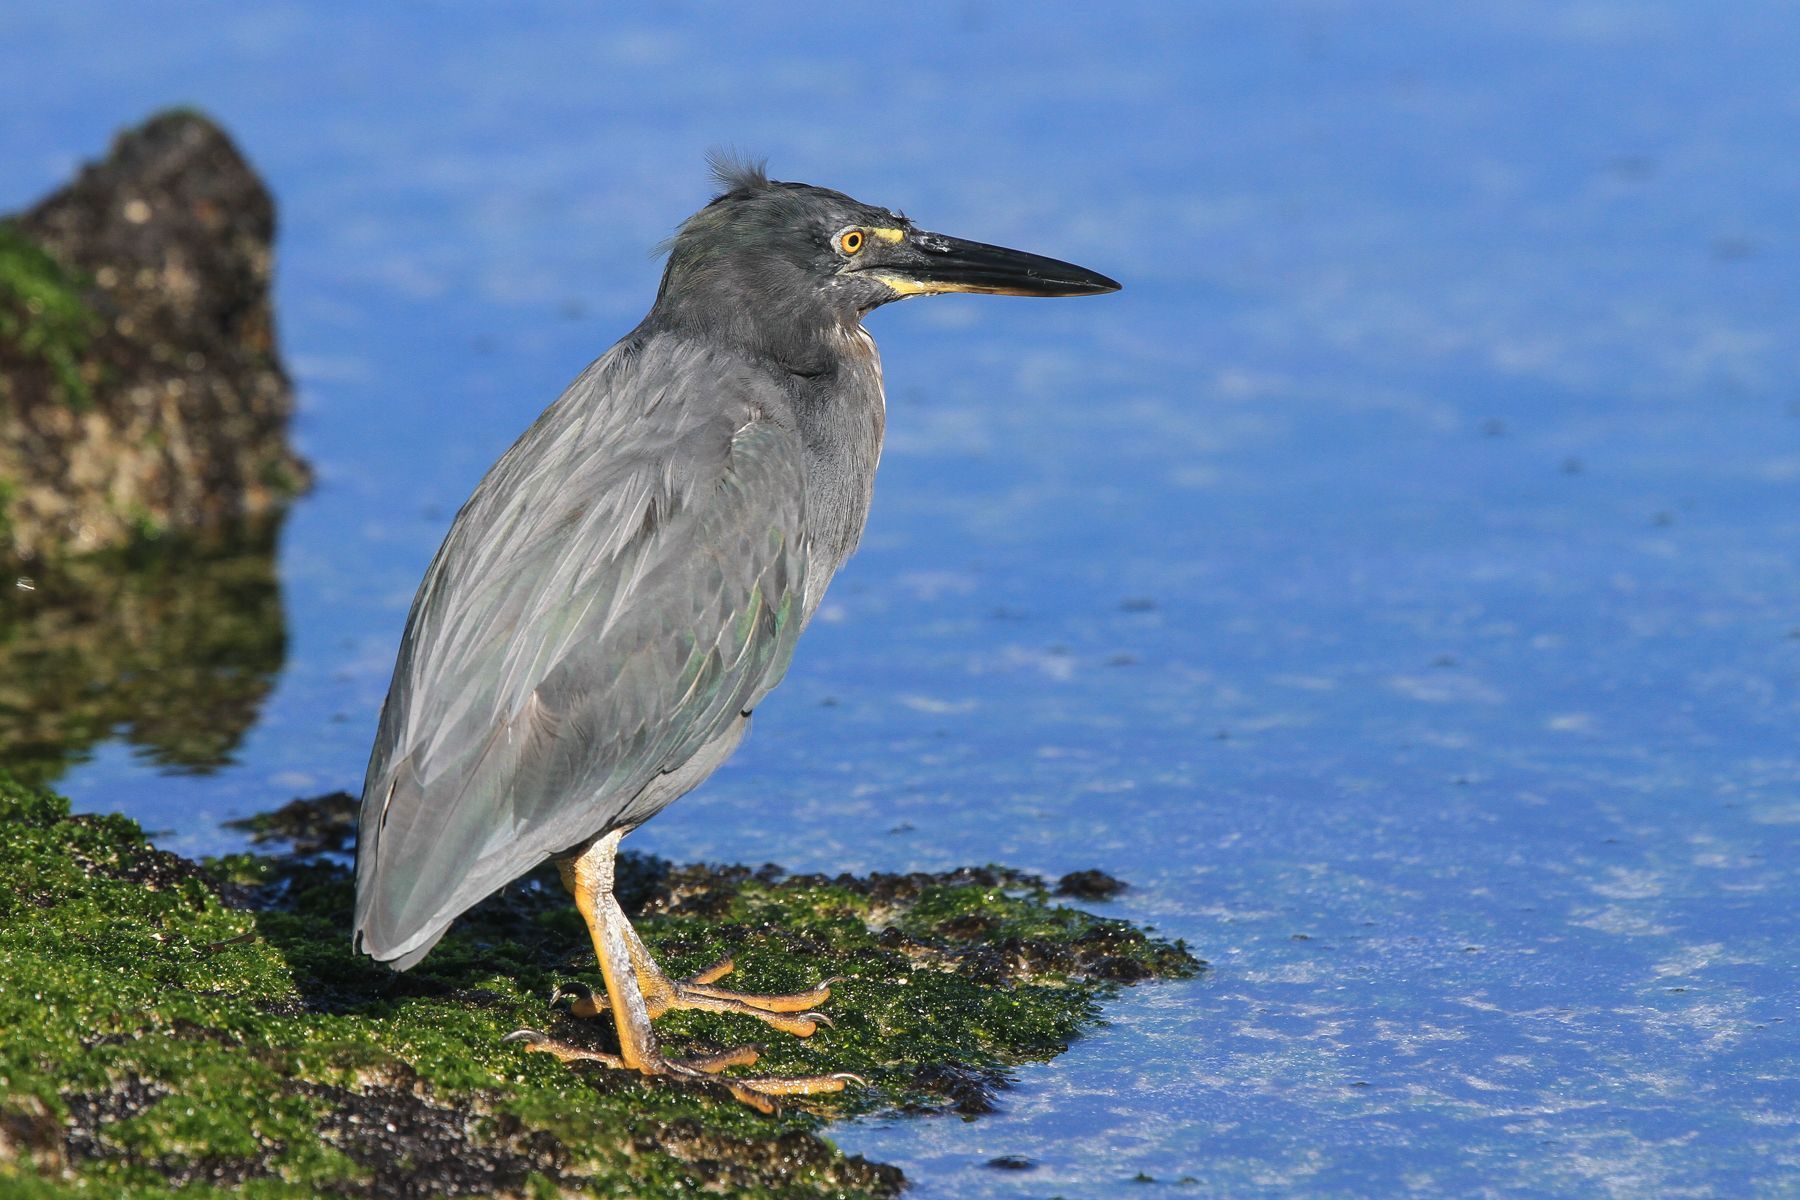 The Galapagagos Islands have no fewer than 30 endemic bird species, most of which, like this Lava Heron, are not seabirds